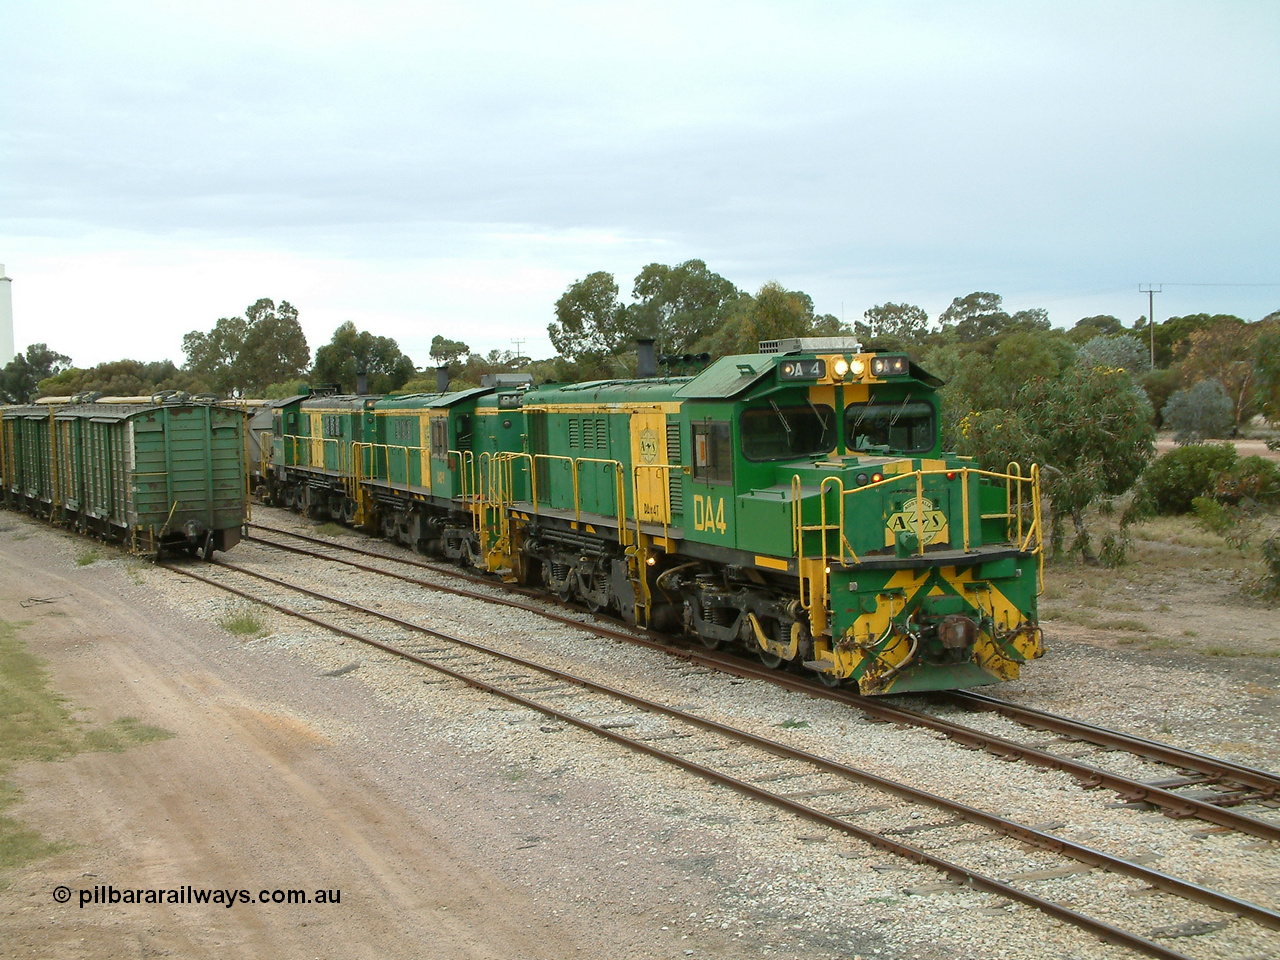 030407 100858
Minnipa, empty grain train shunts back into the grain siding with a trio of former Australian National Co-Co locomotives with rebuilt former AE Goodwin ALCo model DL531 830 class ex 839, serial no. 83730, rebuilt by Port Augusta Workshops to DA class, leading two AE Goodwin ALCo model DL531 830 class units 842, serial no. 84140 and 851 serial no. 84137, 851 having been on the Eyre Peninsula since delivered in 1962. 7th April, 2003.
Keywords: DA-class;DA4;83730;Port-Augusta-WS;ALCo;DL531G/1;830-class;839;rebuild;